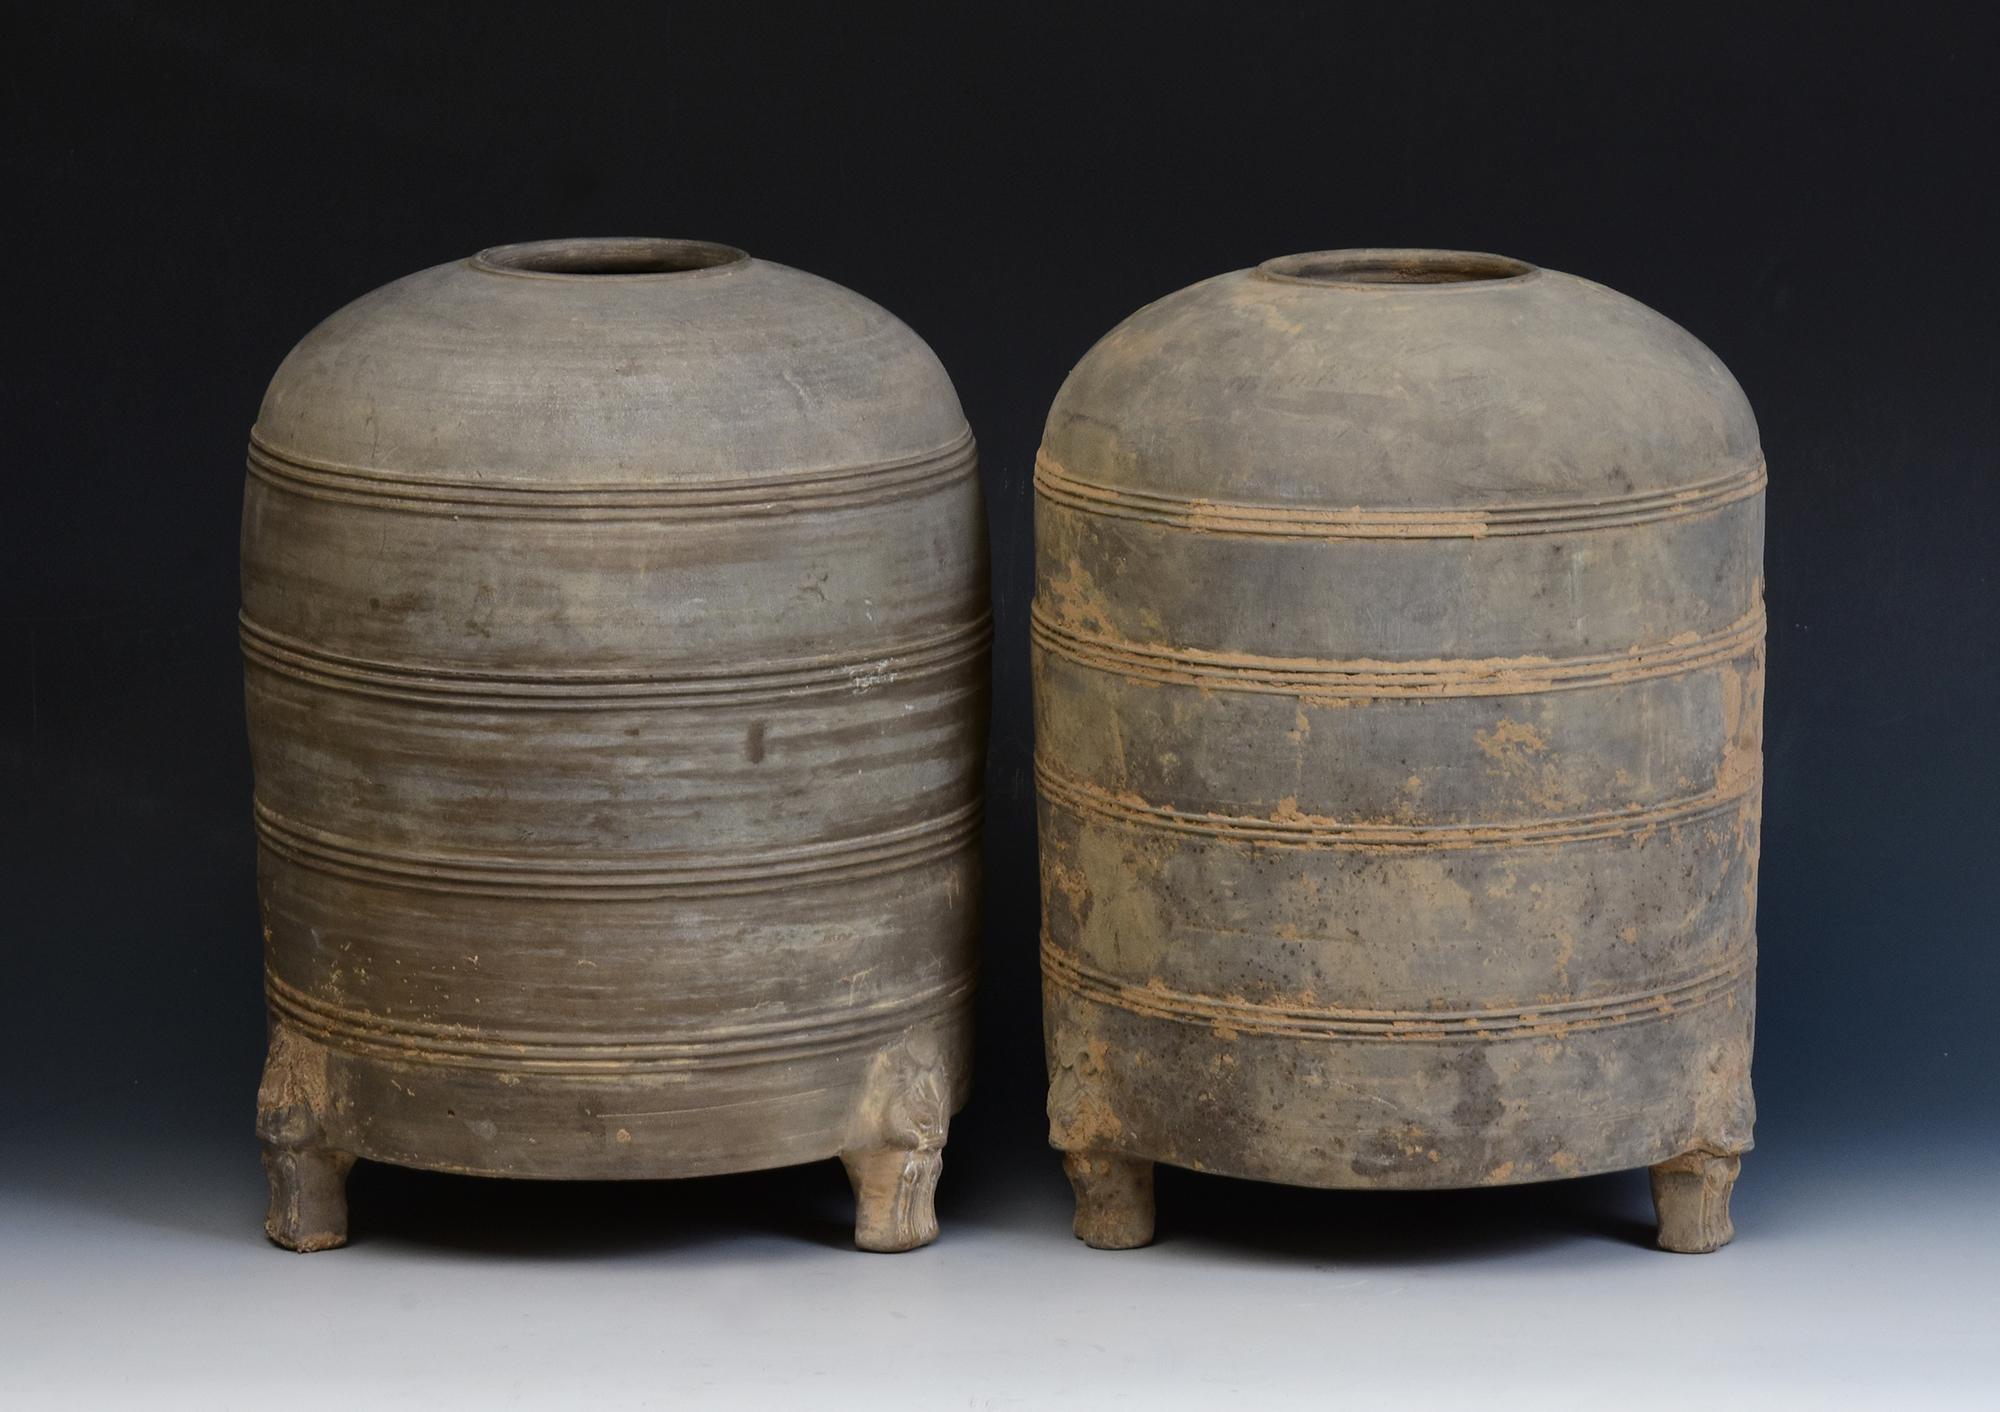 A pair of antique Chinese pottery granary jars with bear-shaped legs, cylindrical shape, decorated with bands of incised lines, and supported by three legs. 

Age: China, Han Dynasty, 206 B.C. - A.D. 220
Size: Height 32 C.M. / Width 23.5 - 24